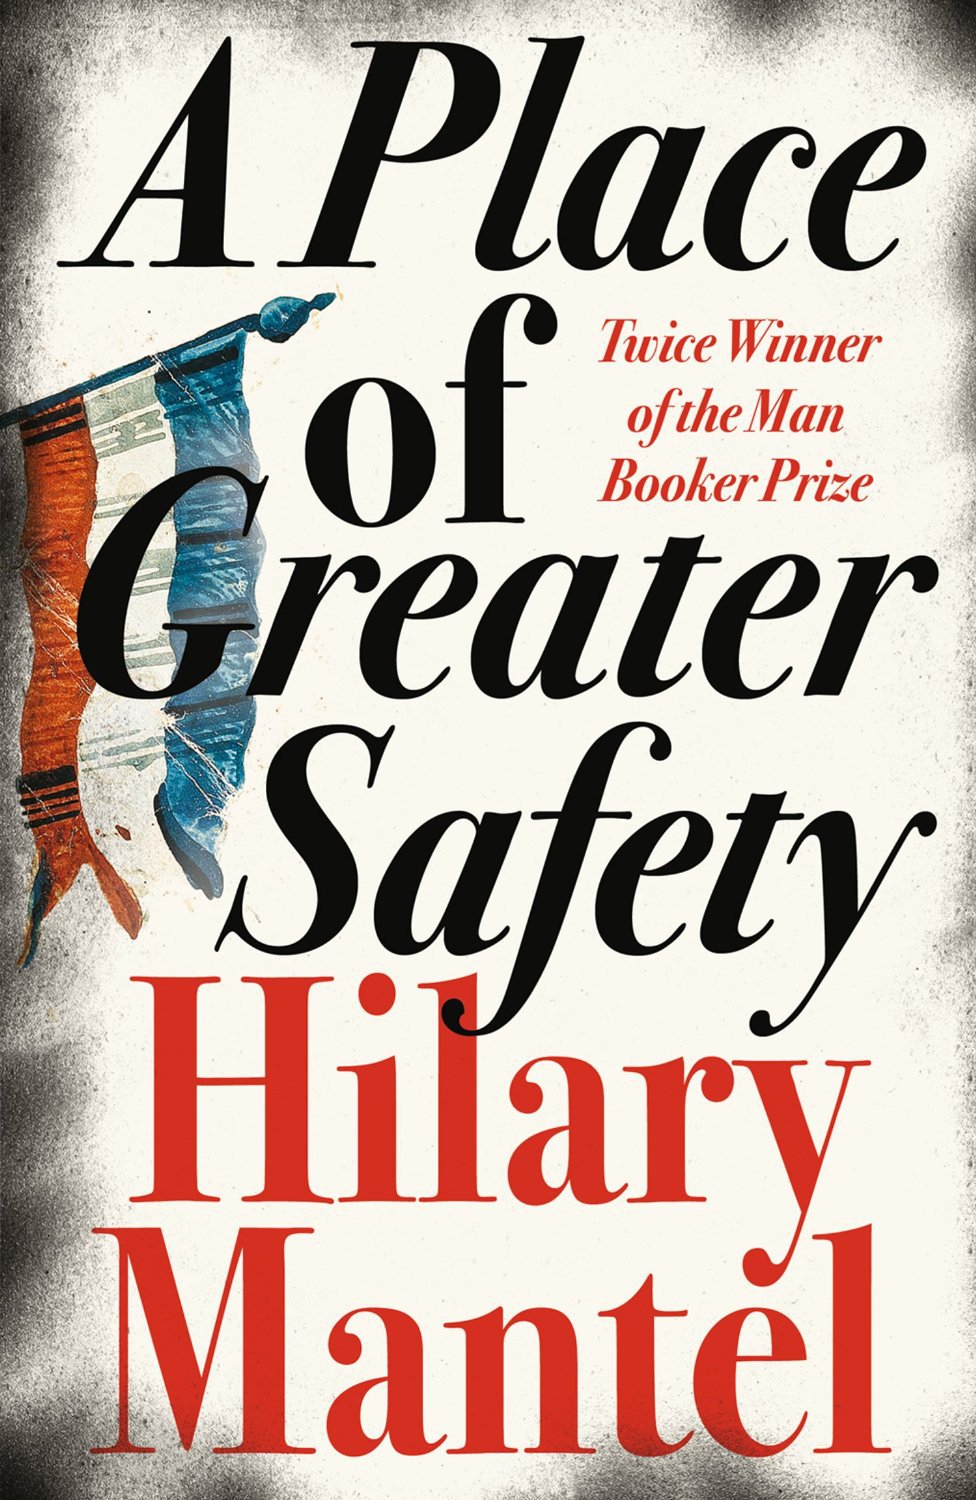 hilary mantel a place of greater safety review